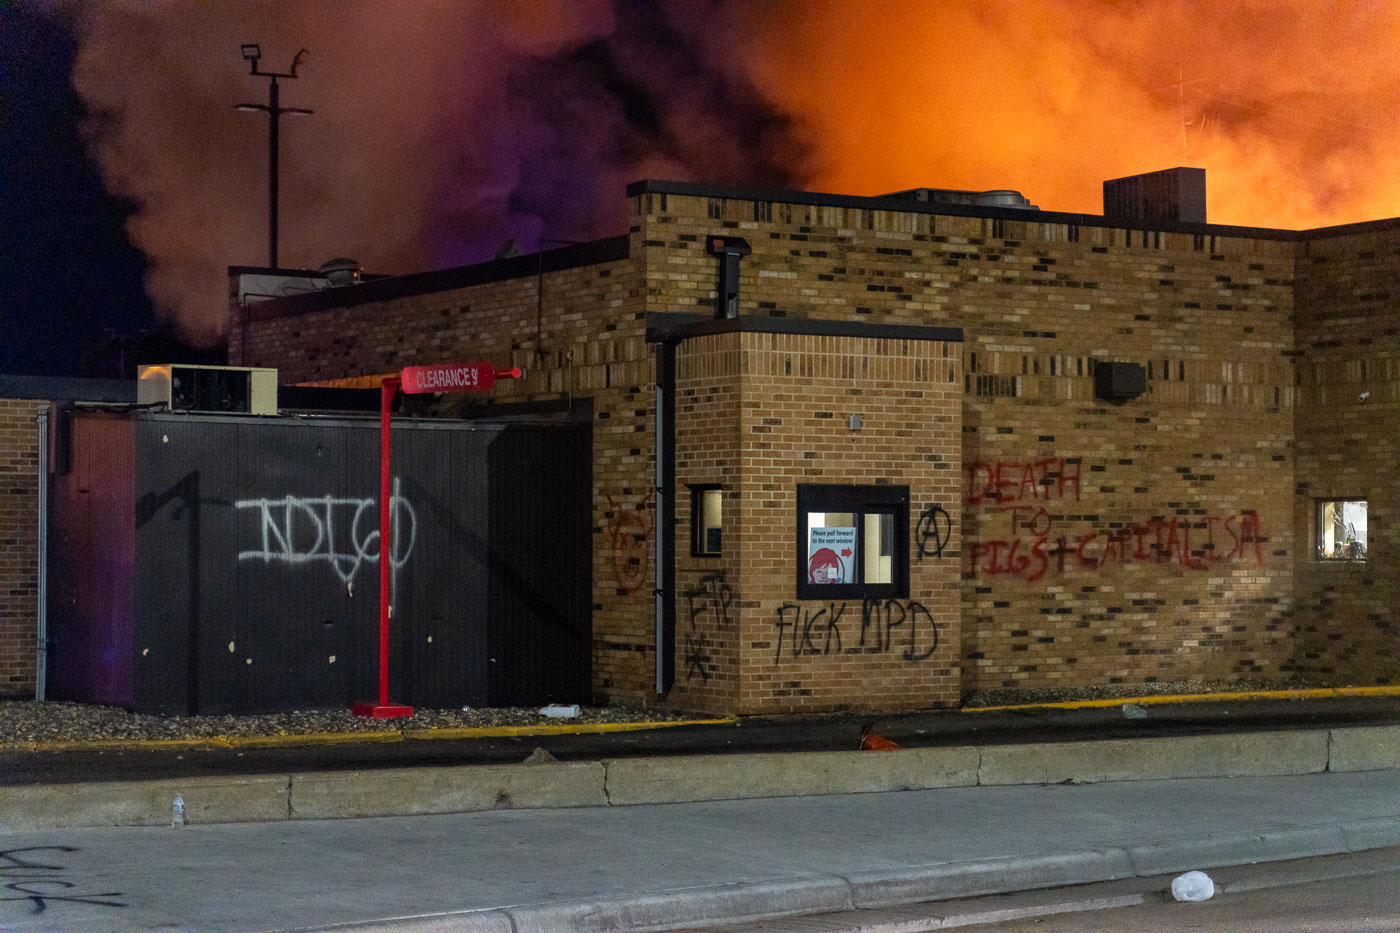 Wendy’s on fire with graffiti on the side